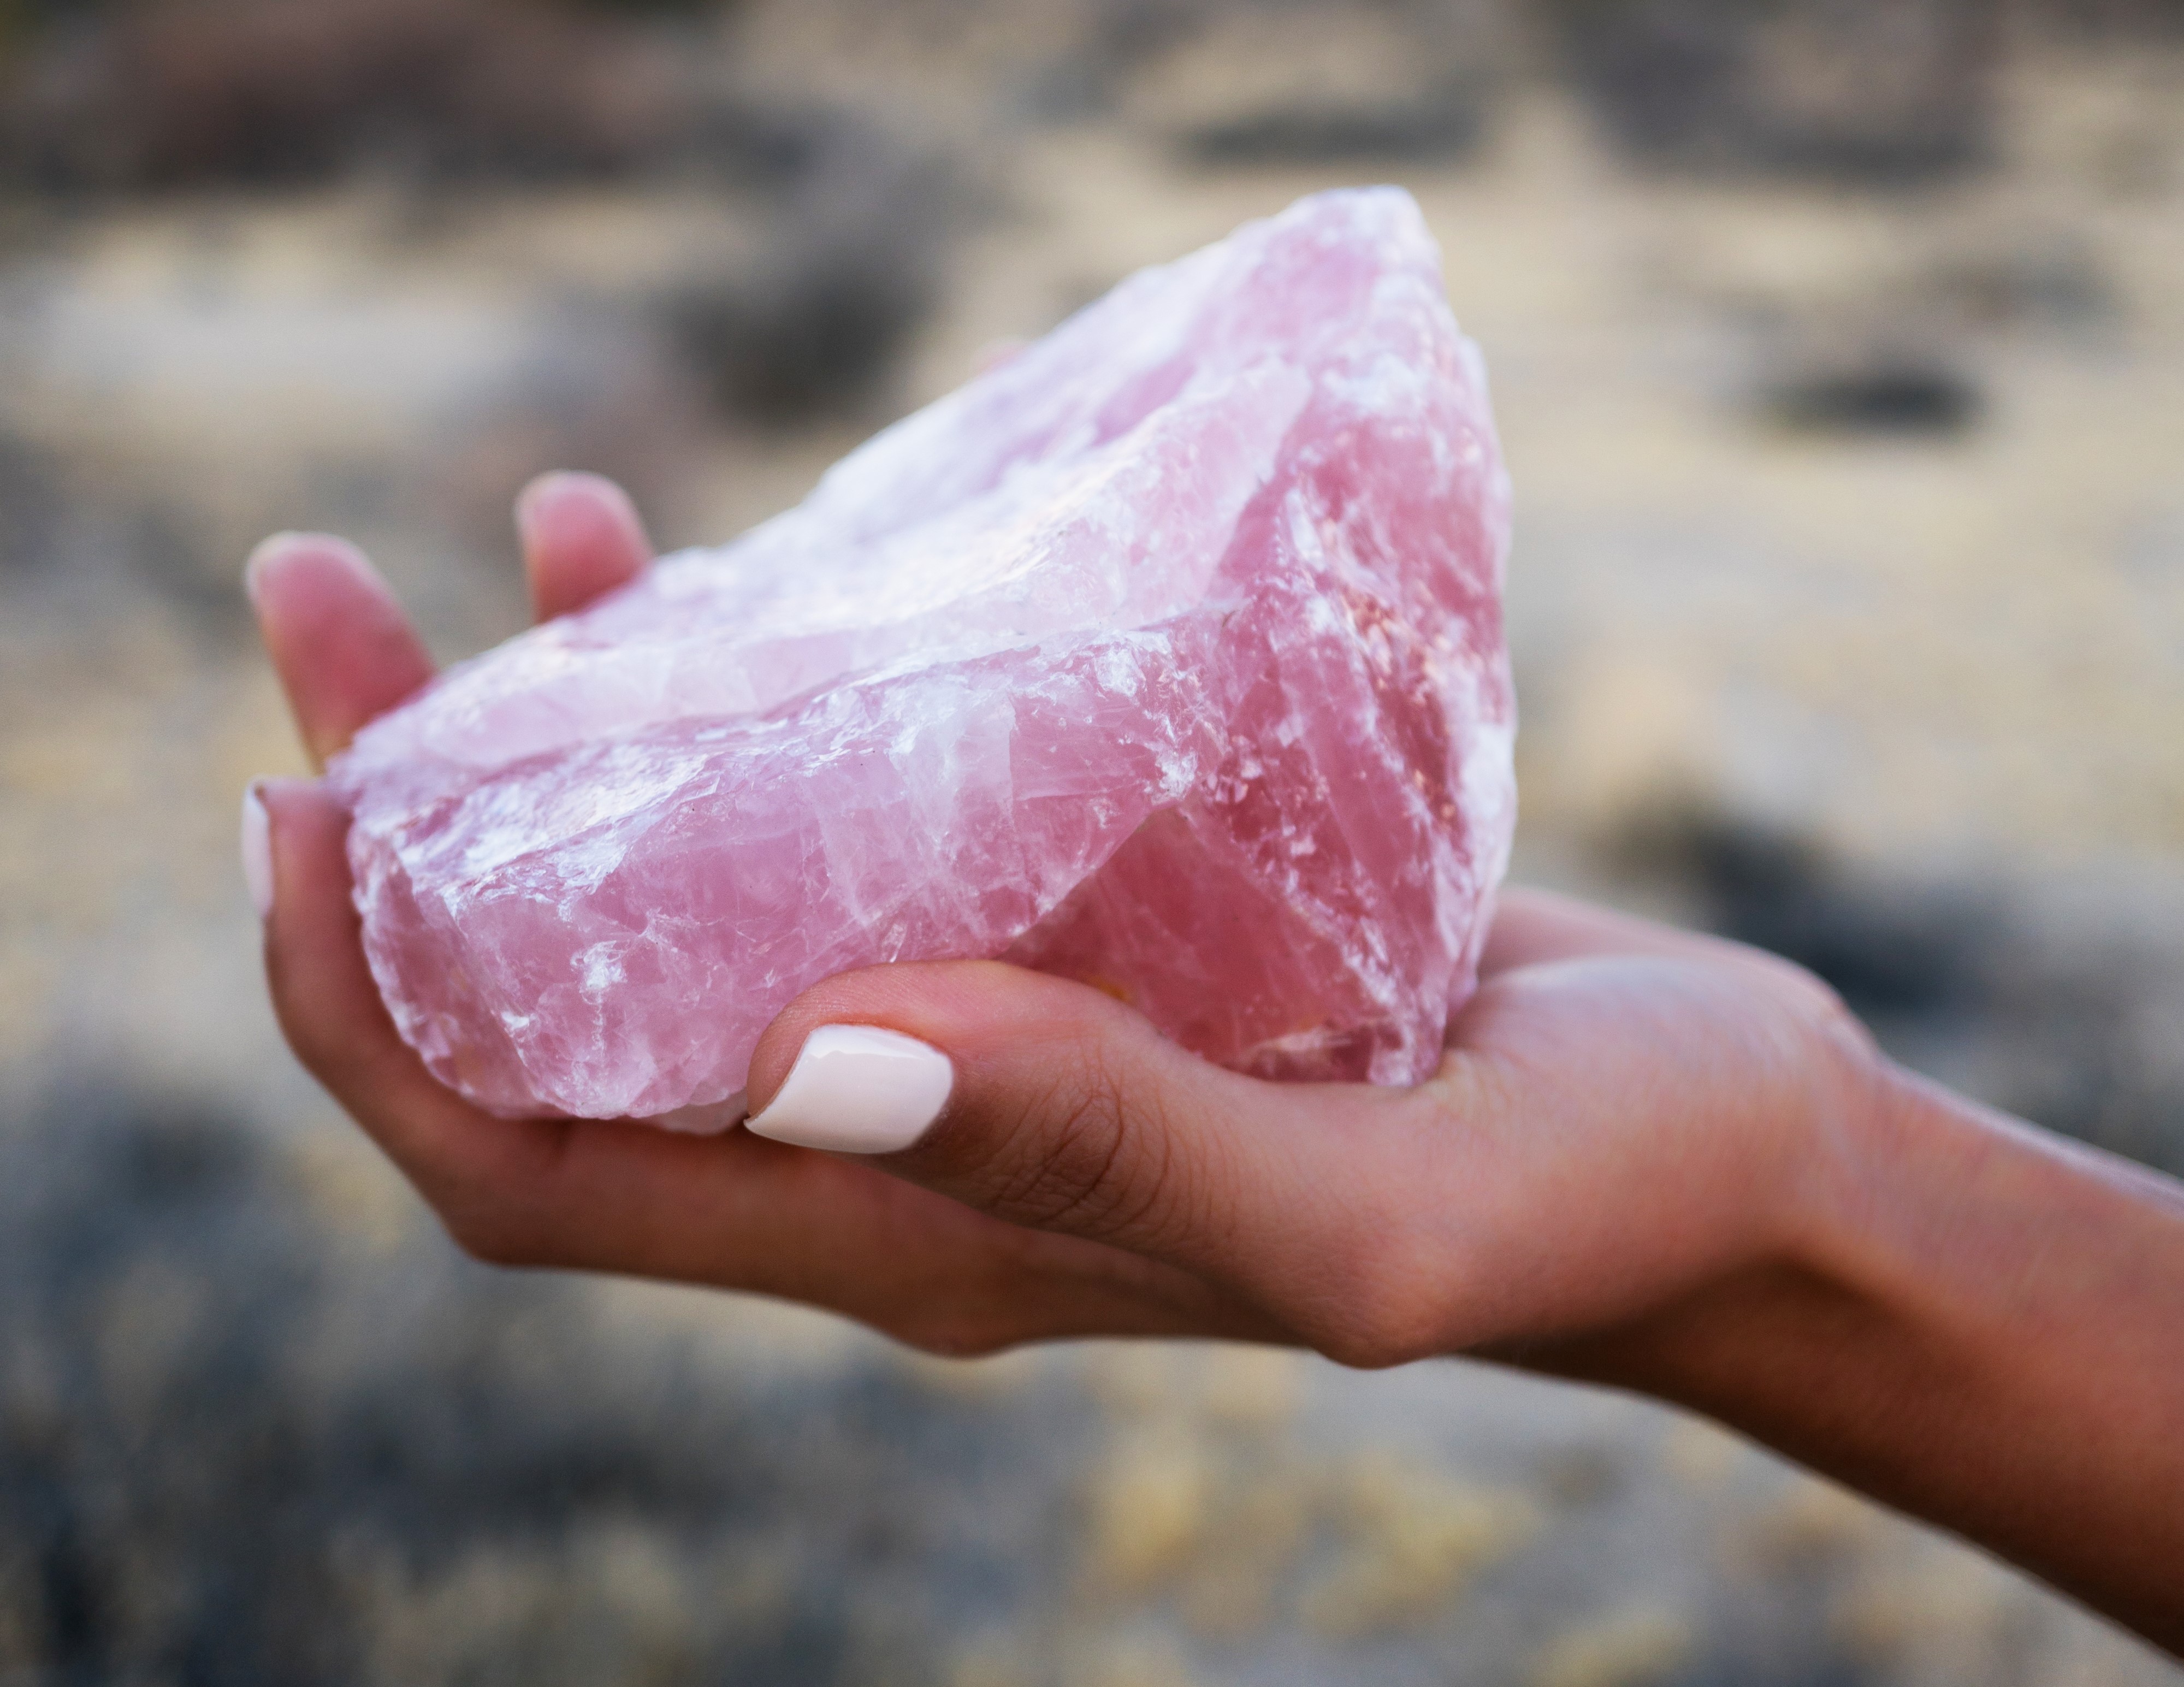 Can crystals actually heal?